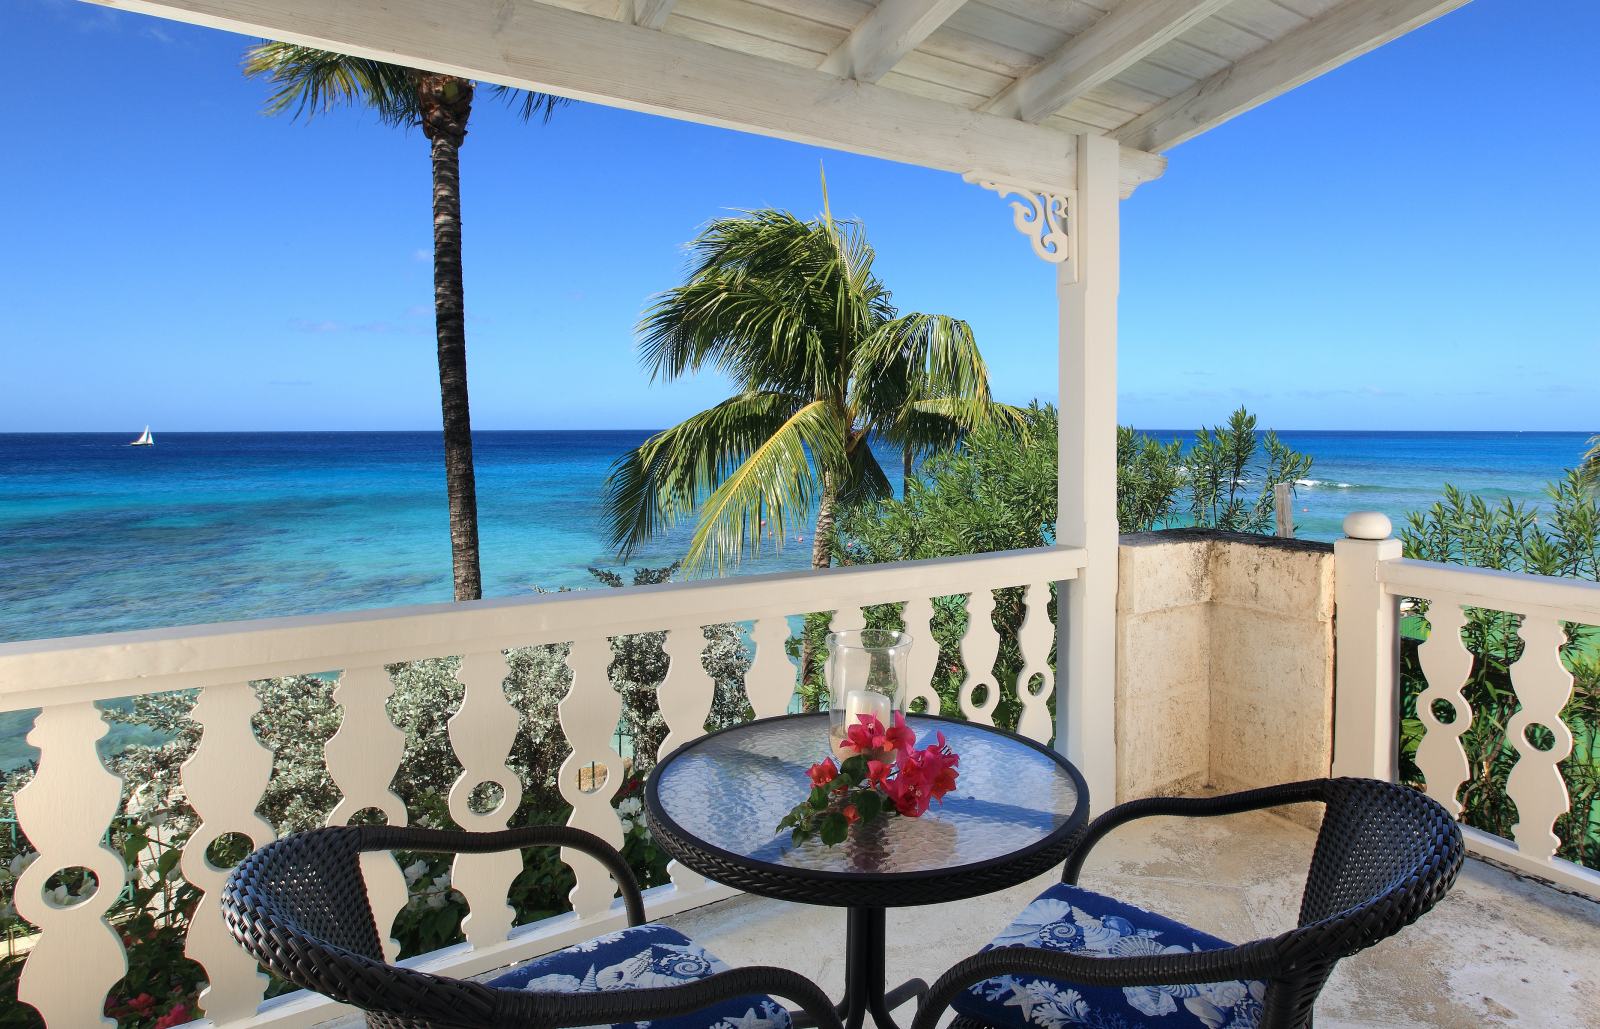 Working Remotely? Why Not Do It In Barbados